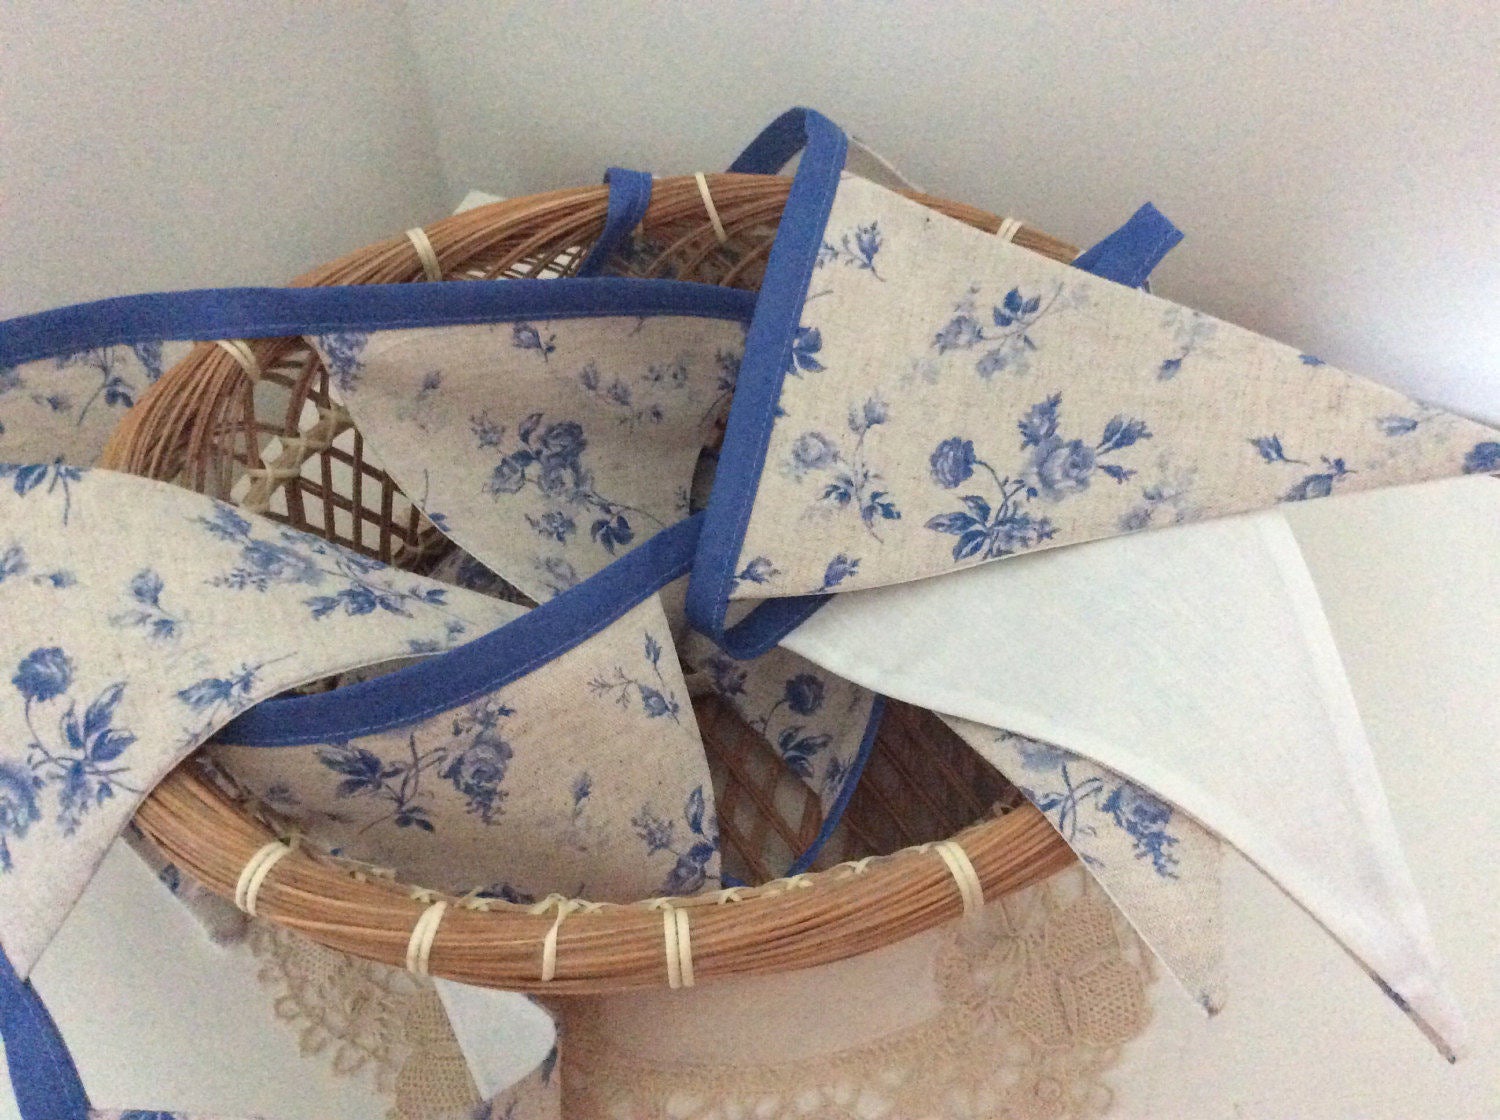 Bunting - linen and blue flowers